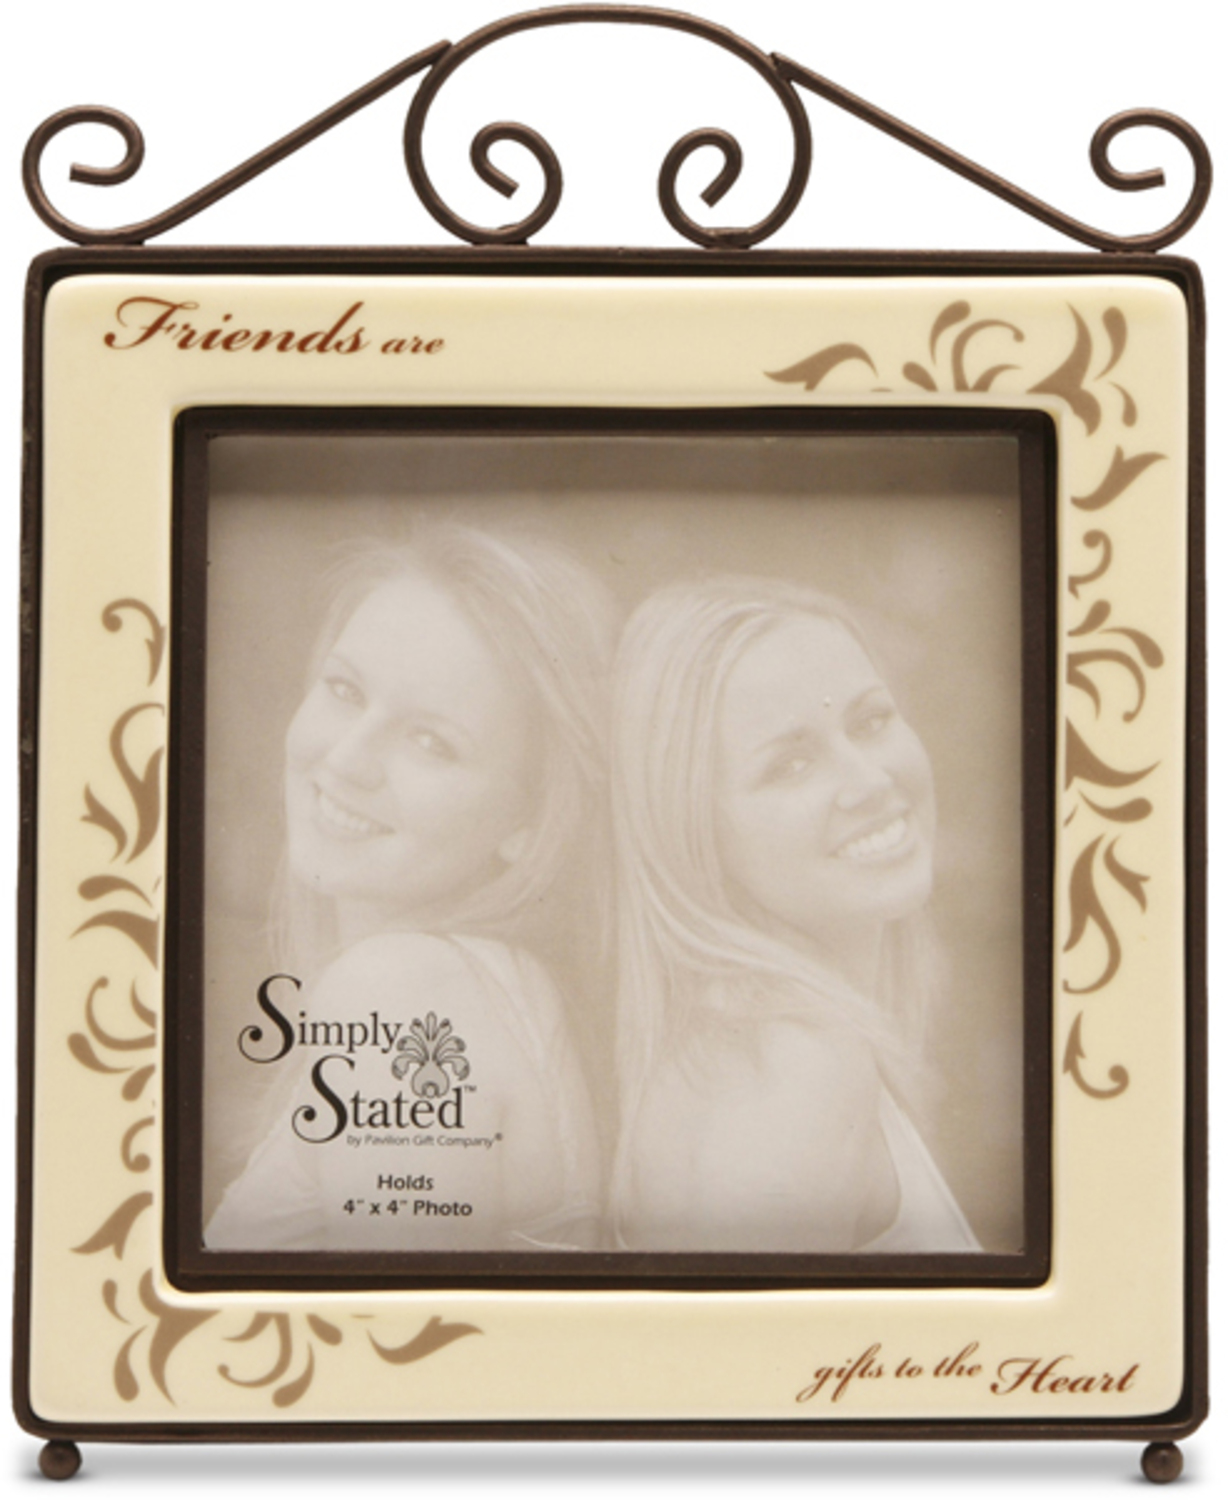 Friend by Simply Stated - Friend - 5.5" x 6.75" Frame (Holds 4" x 4" Photo)